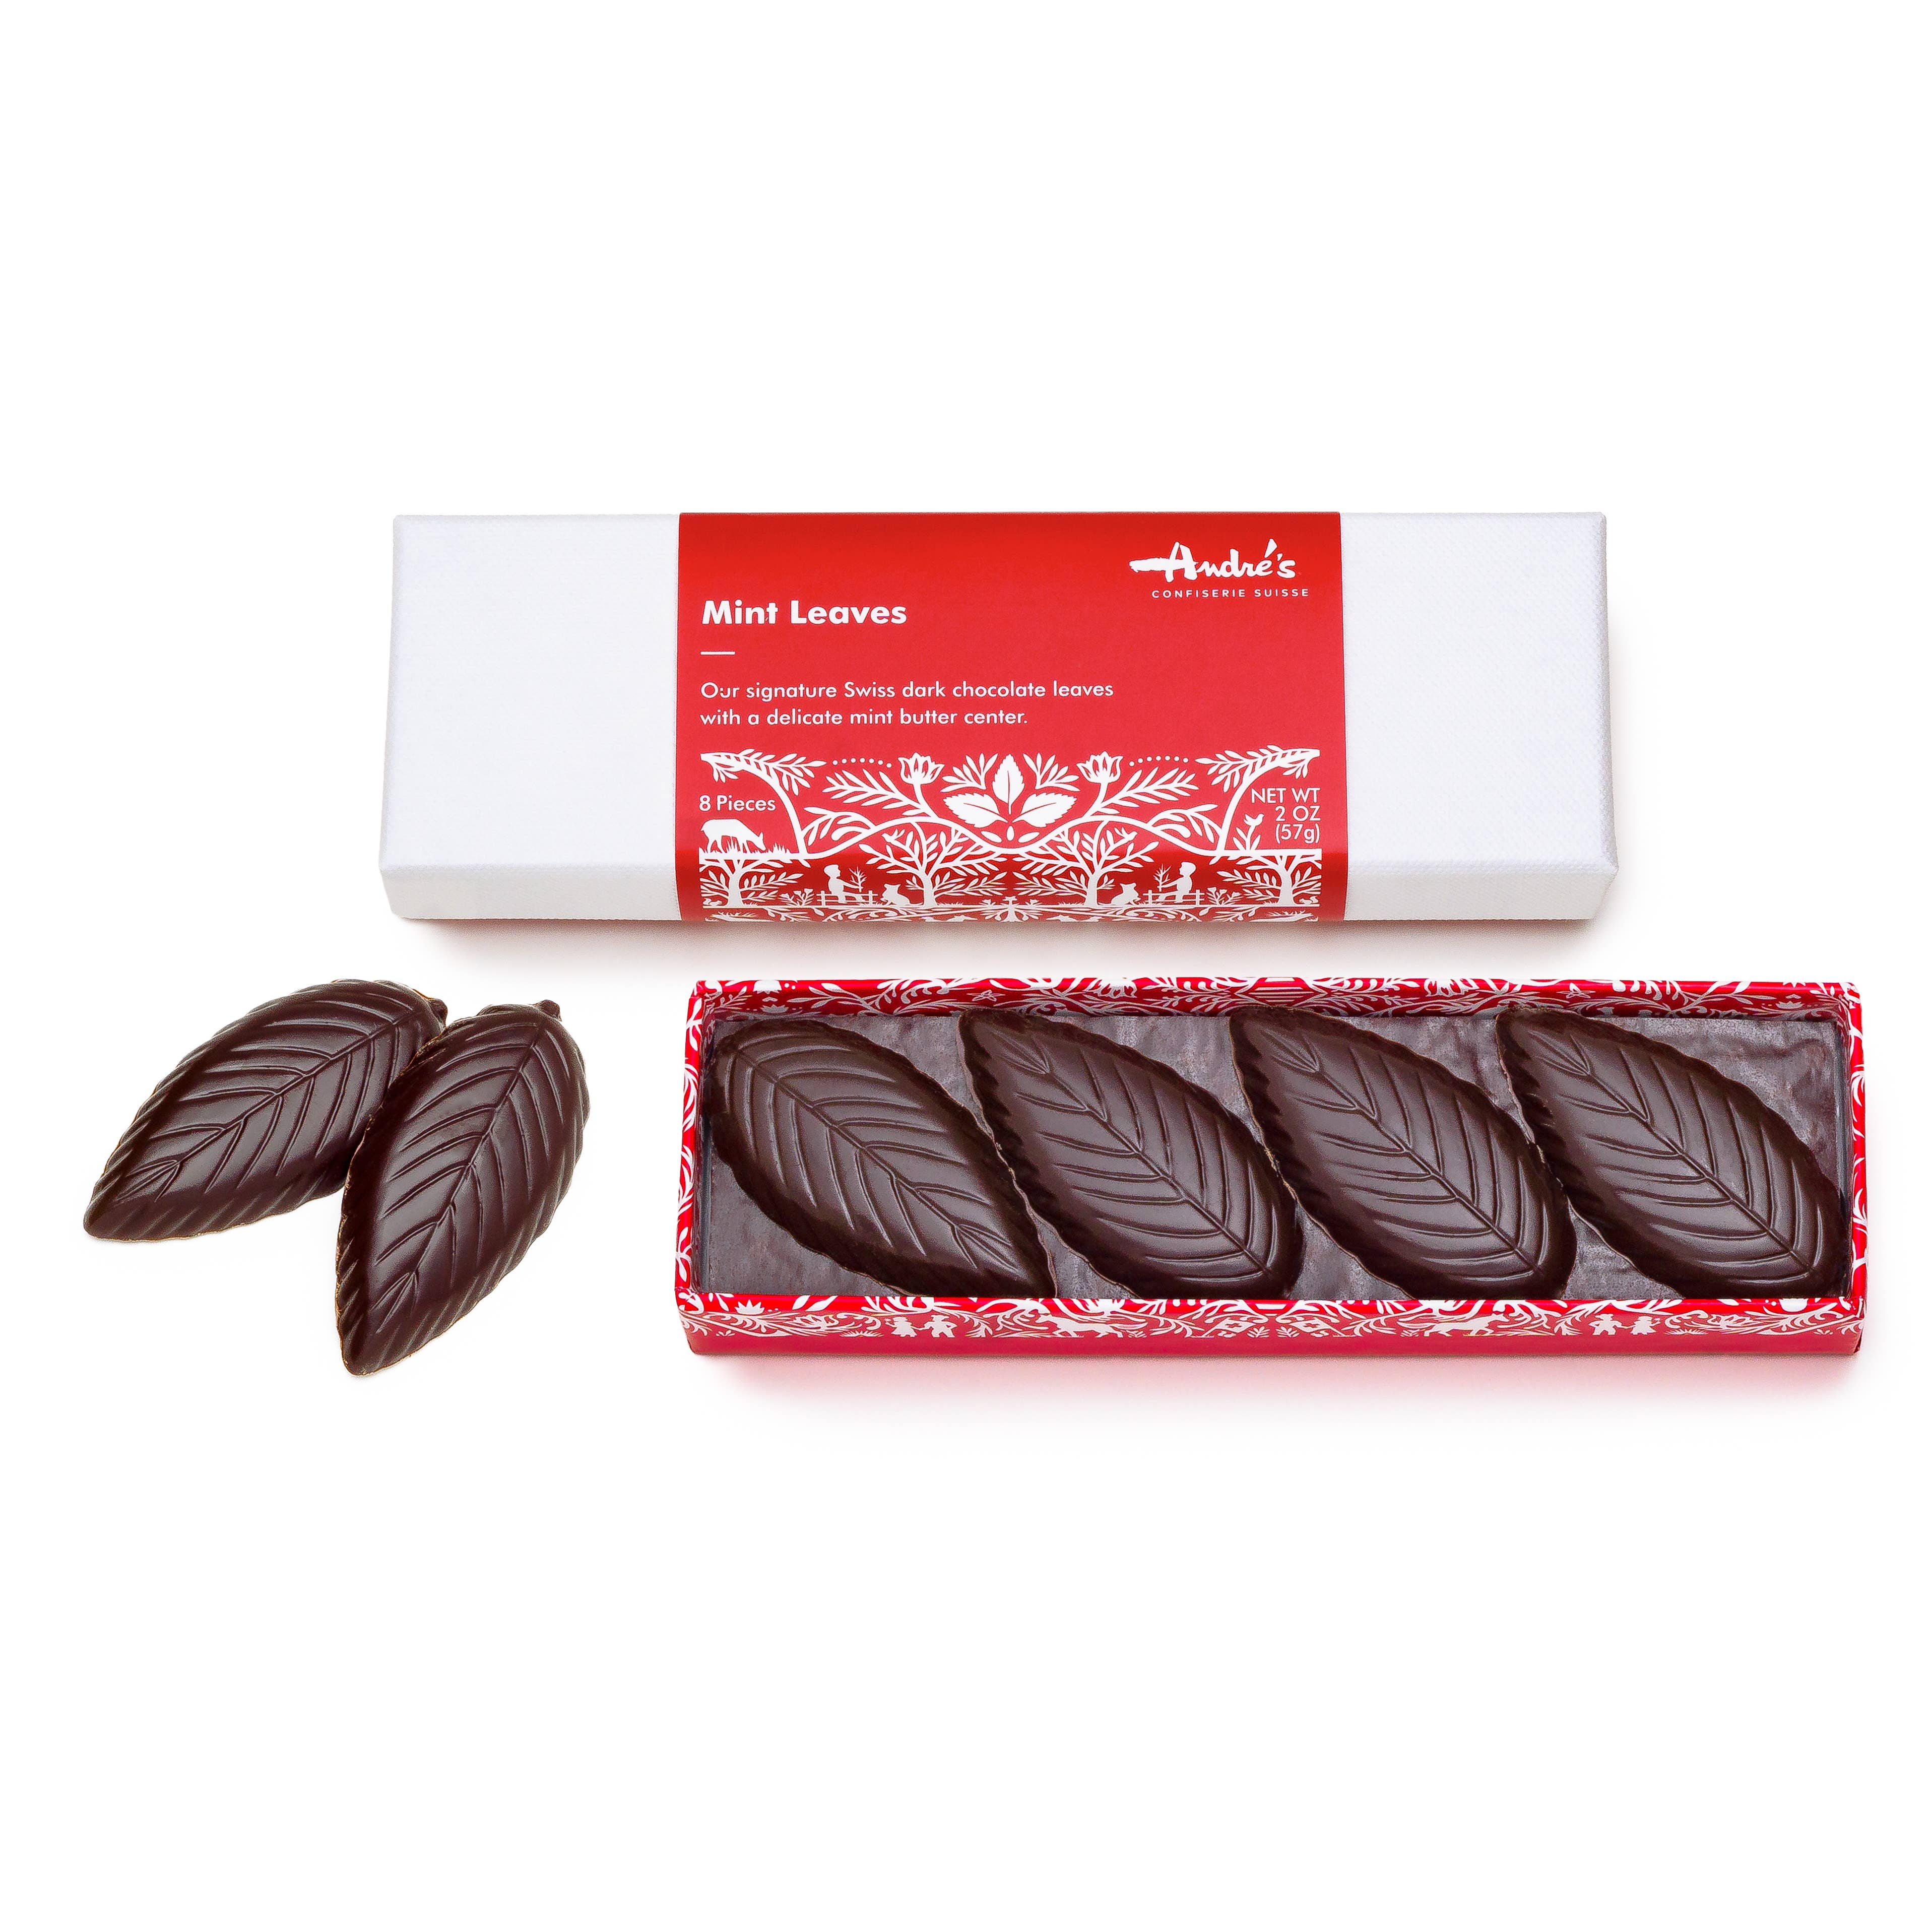 Online Gift Card (Code) - André's Confiserie Suisse